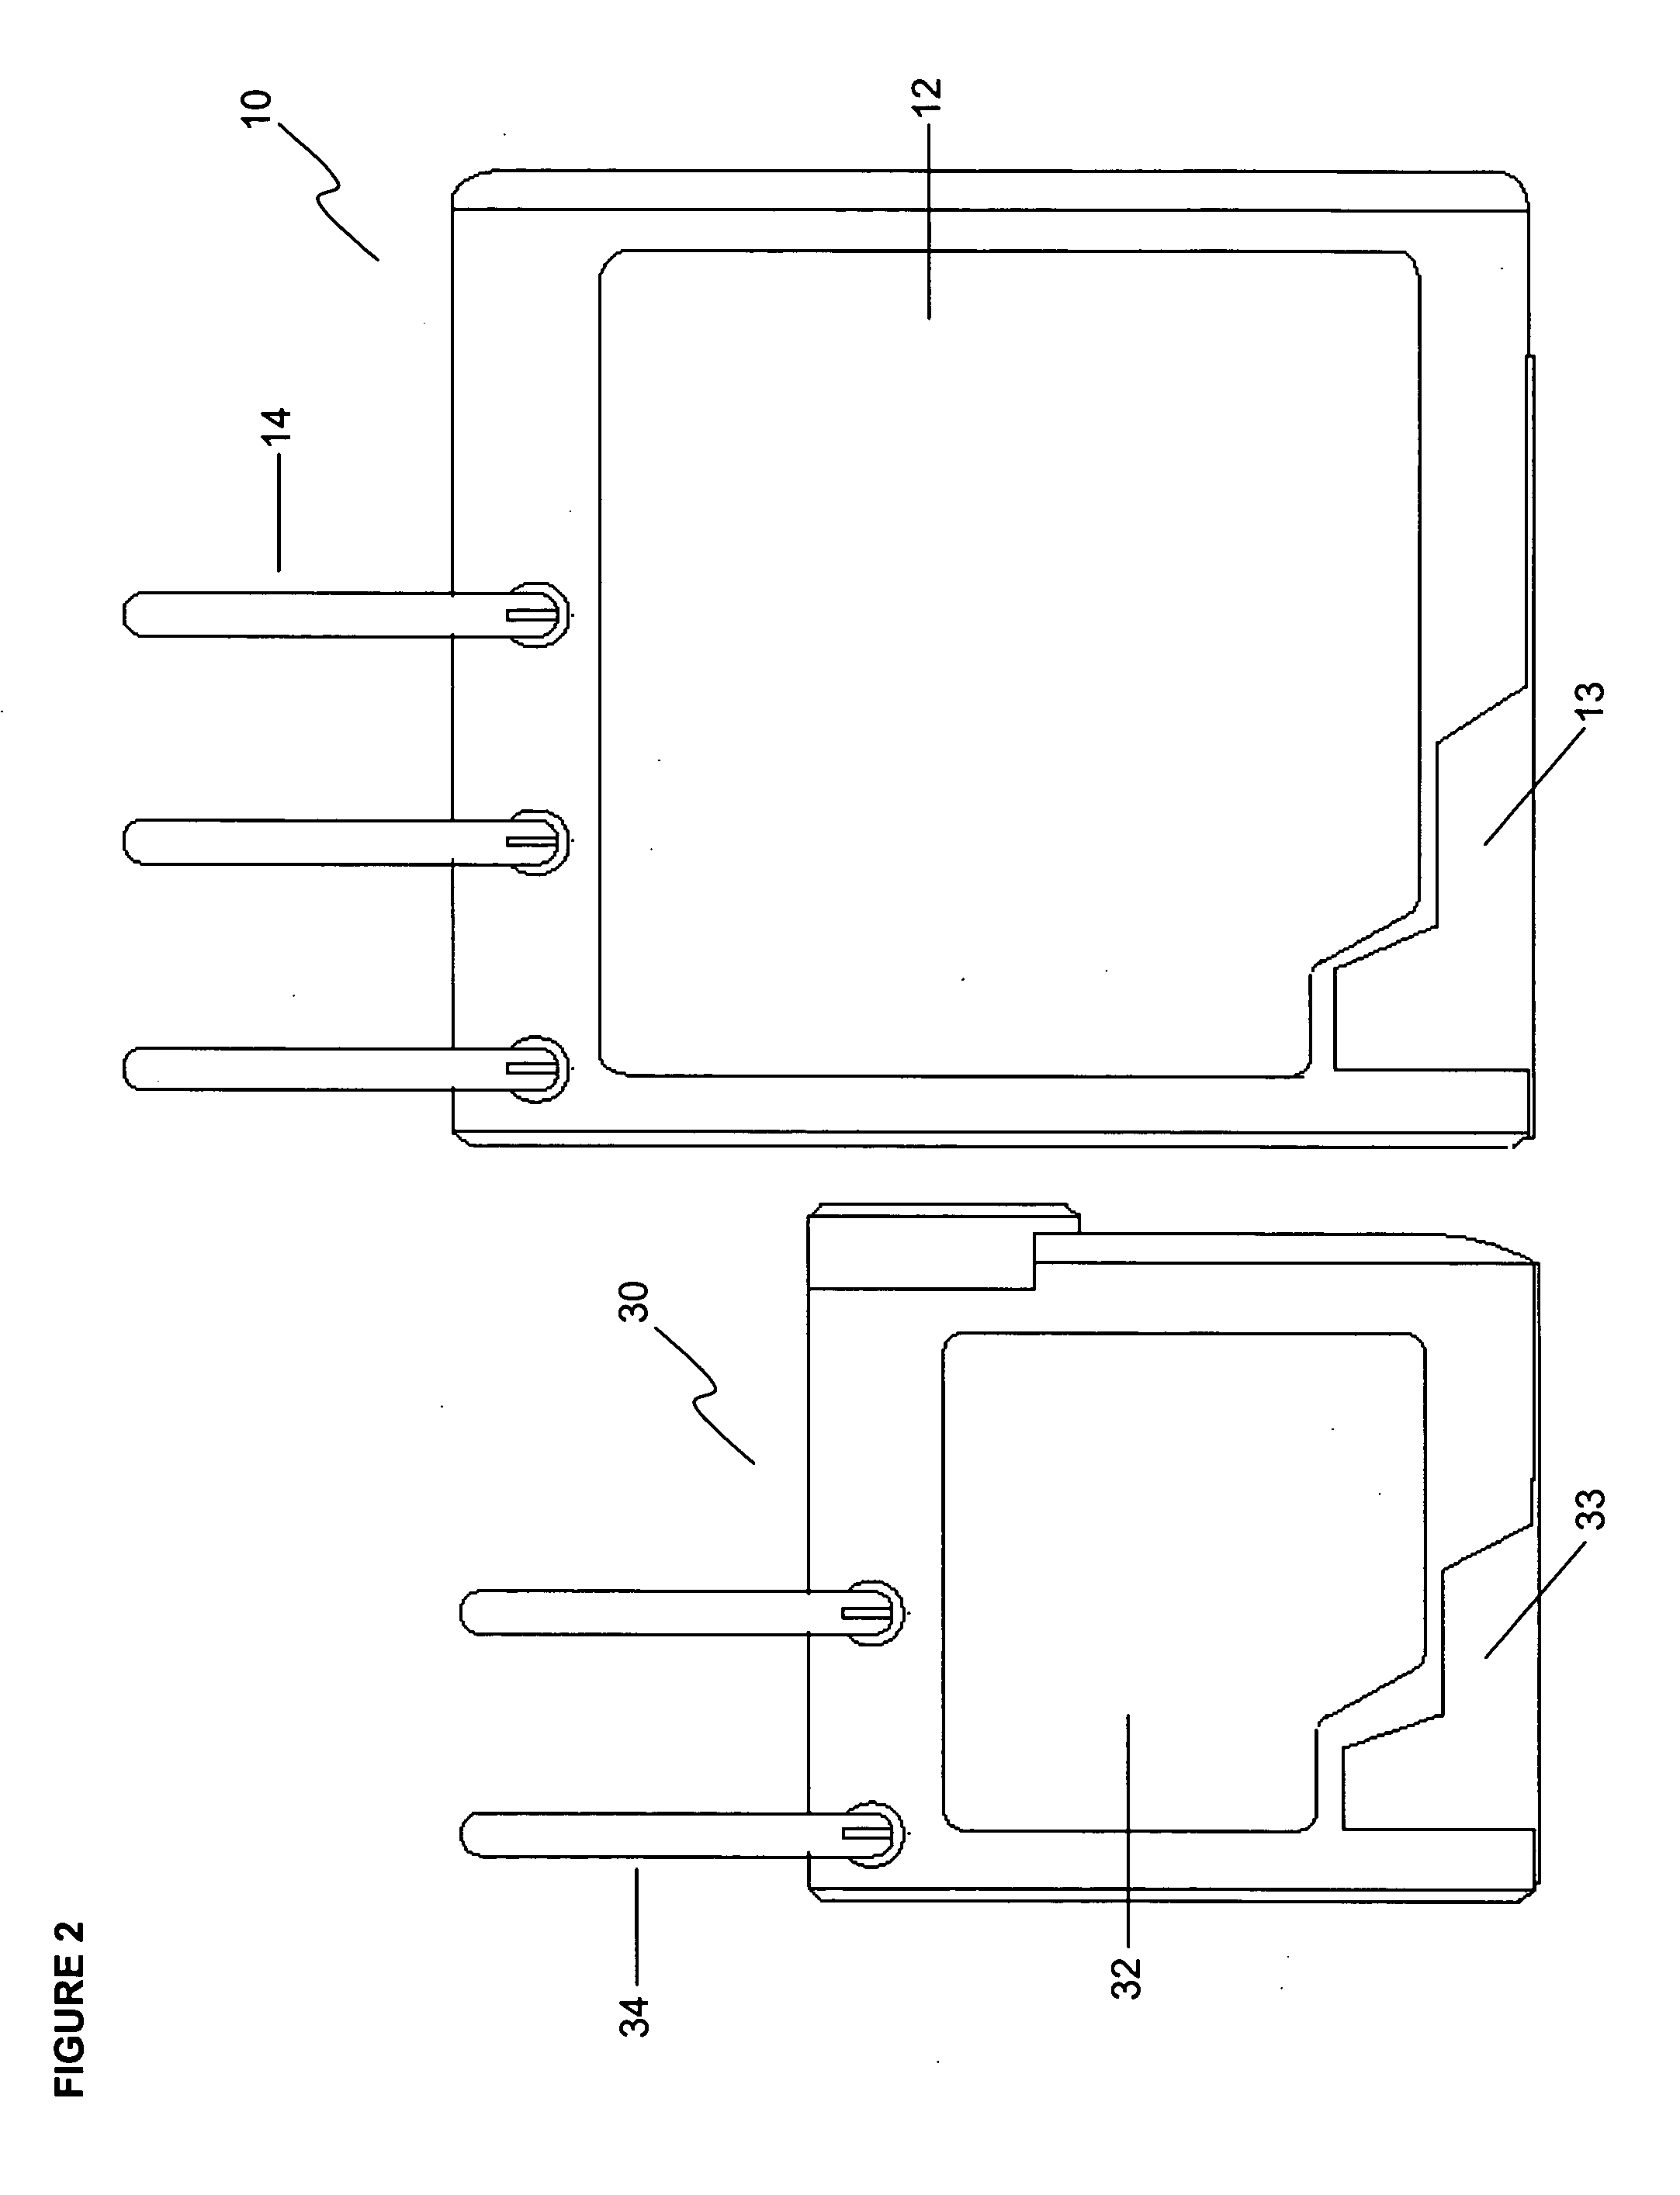 Wireless smart camera system and method